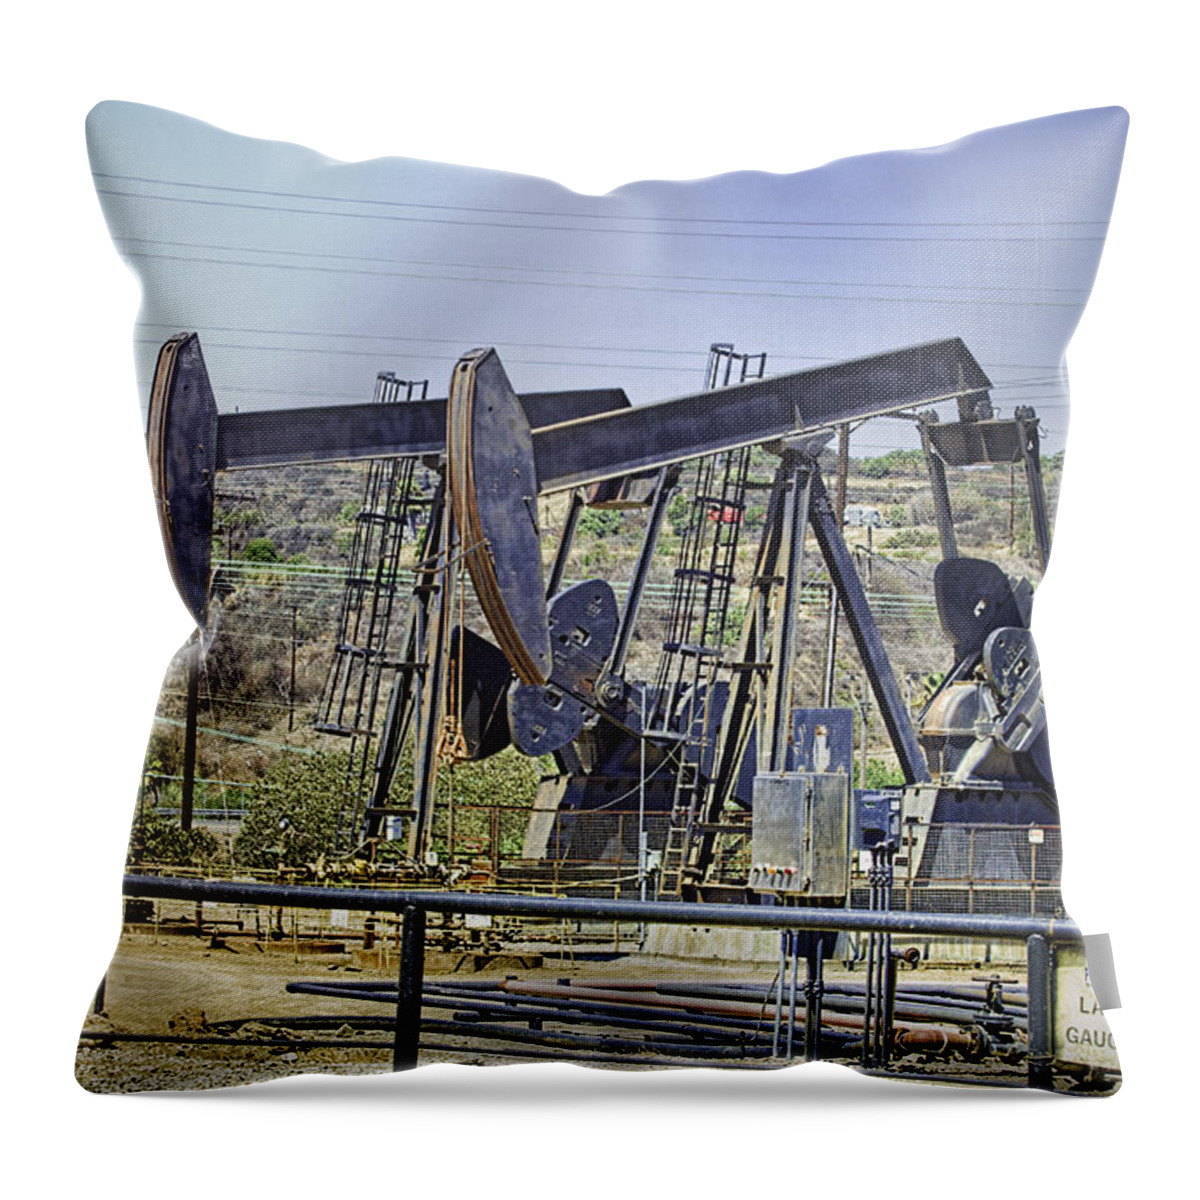 Oil Wells Pumping Throw Pillow featuring the photograph Oil Wells Pumping by Chuck Staley